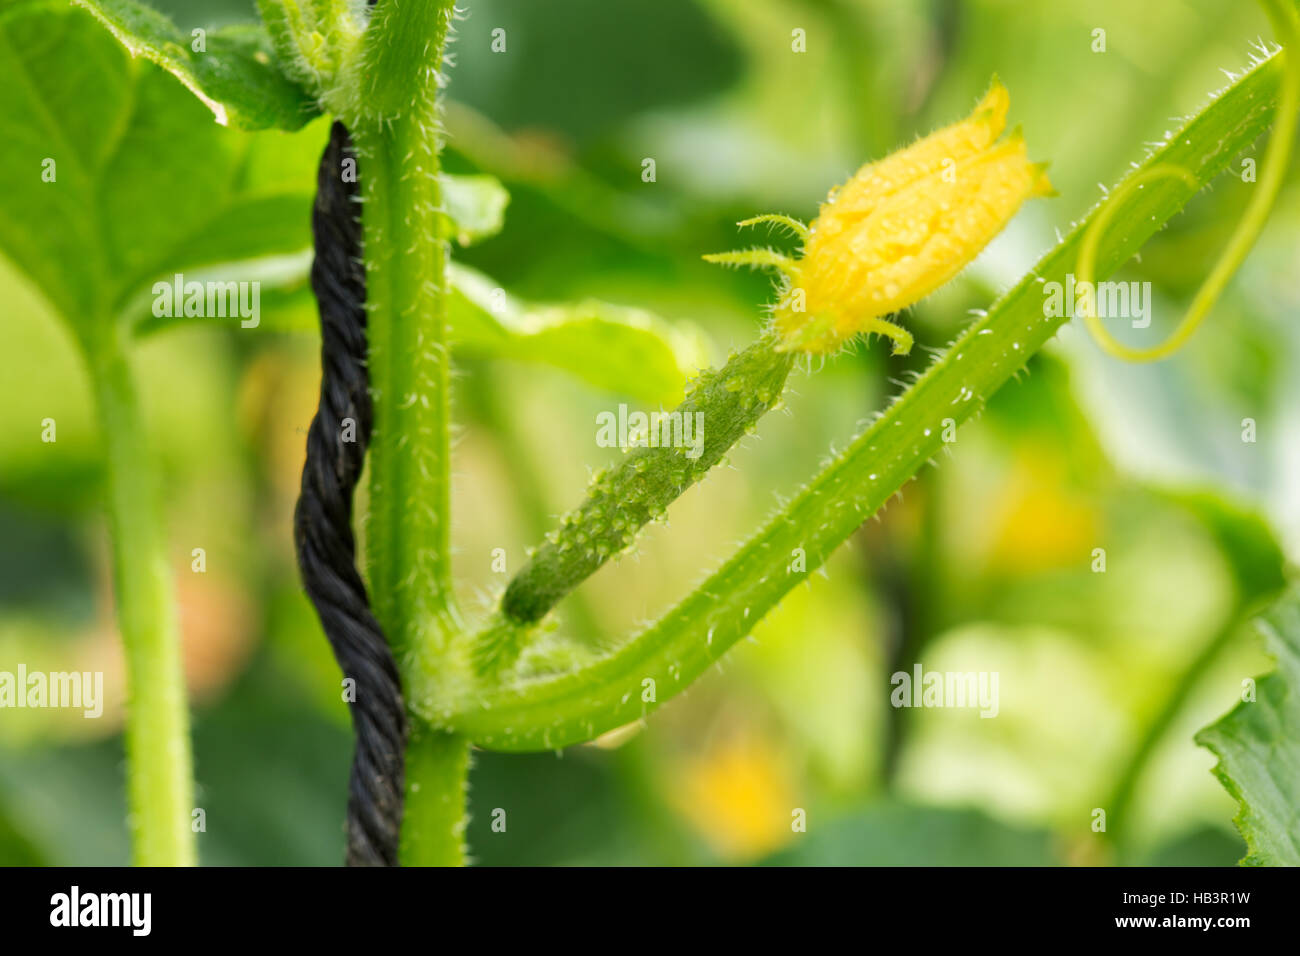 Cucumber Plant growing up Stock Photo